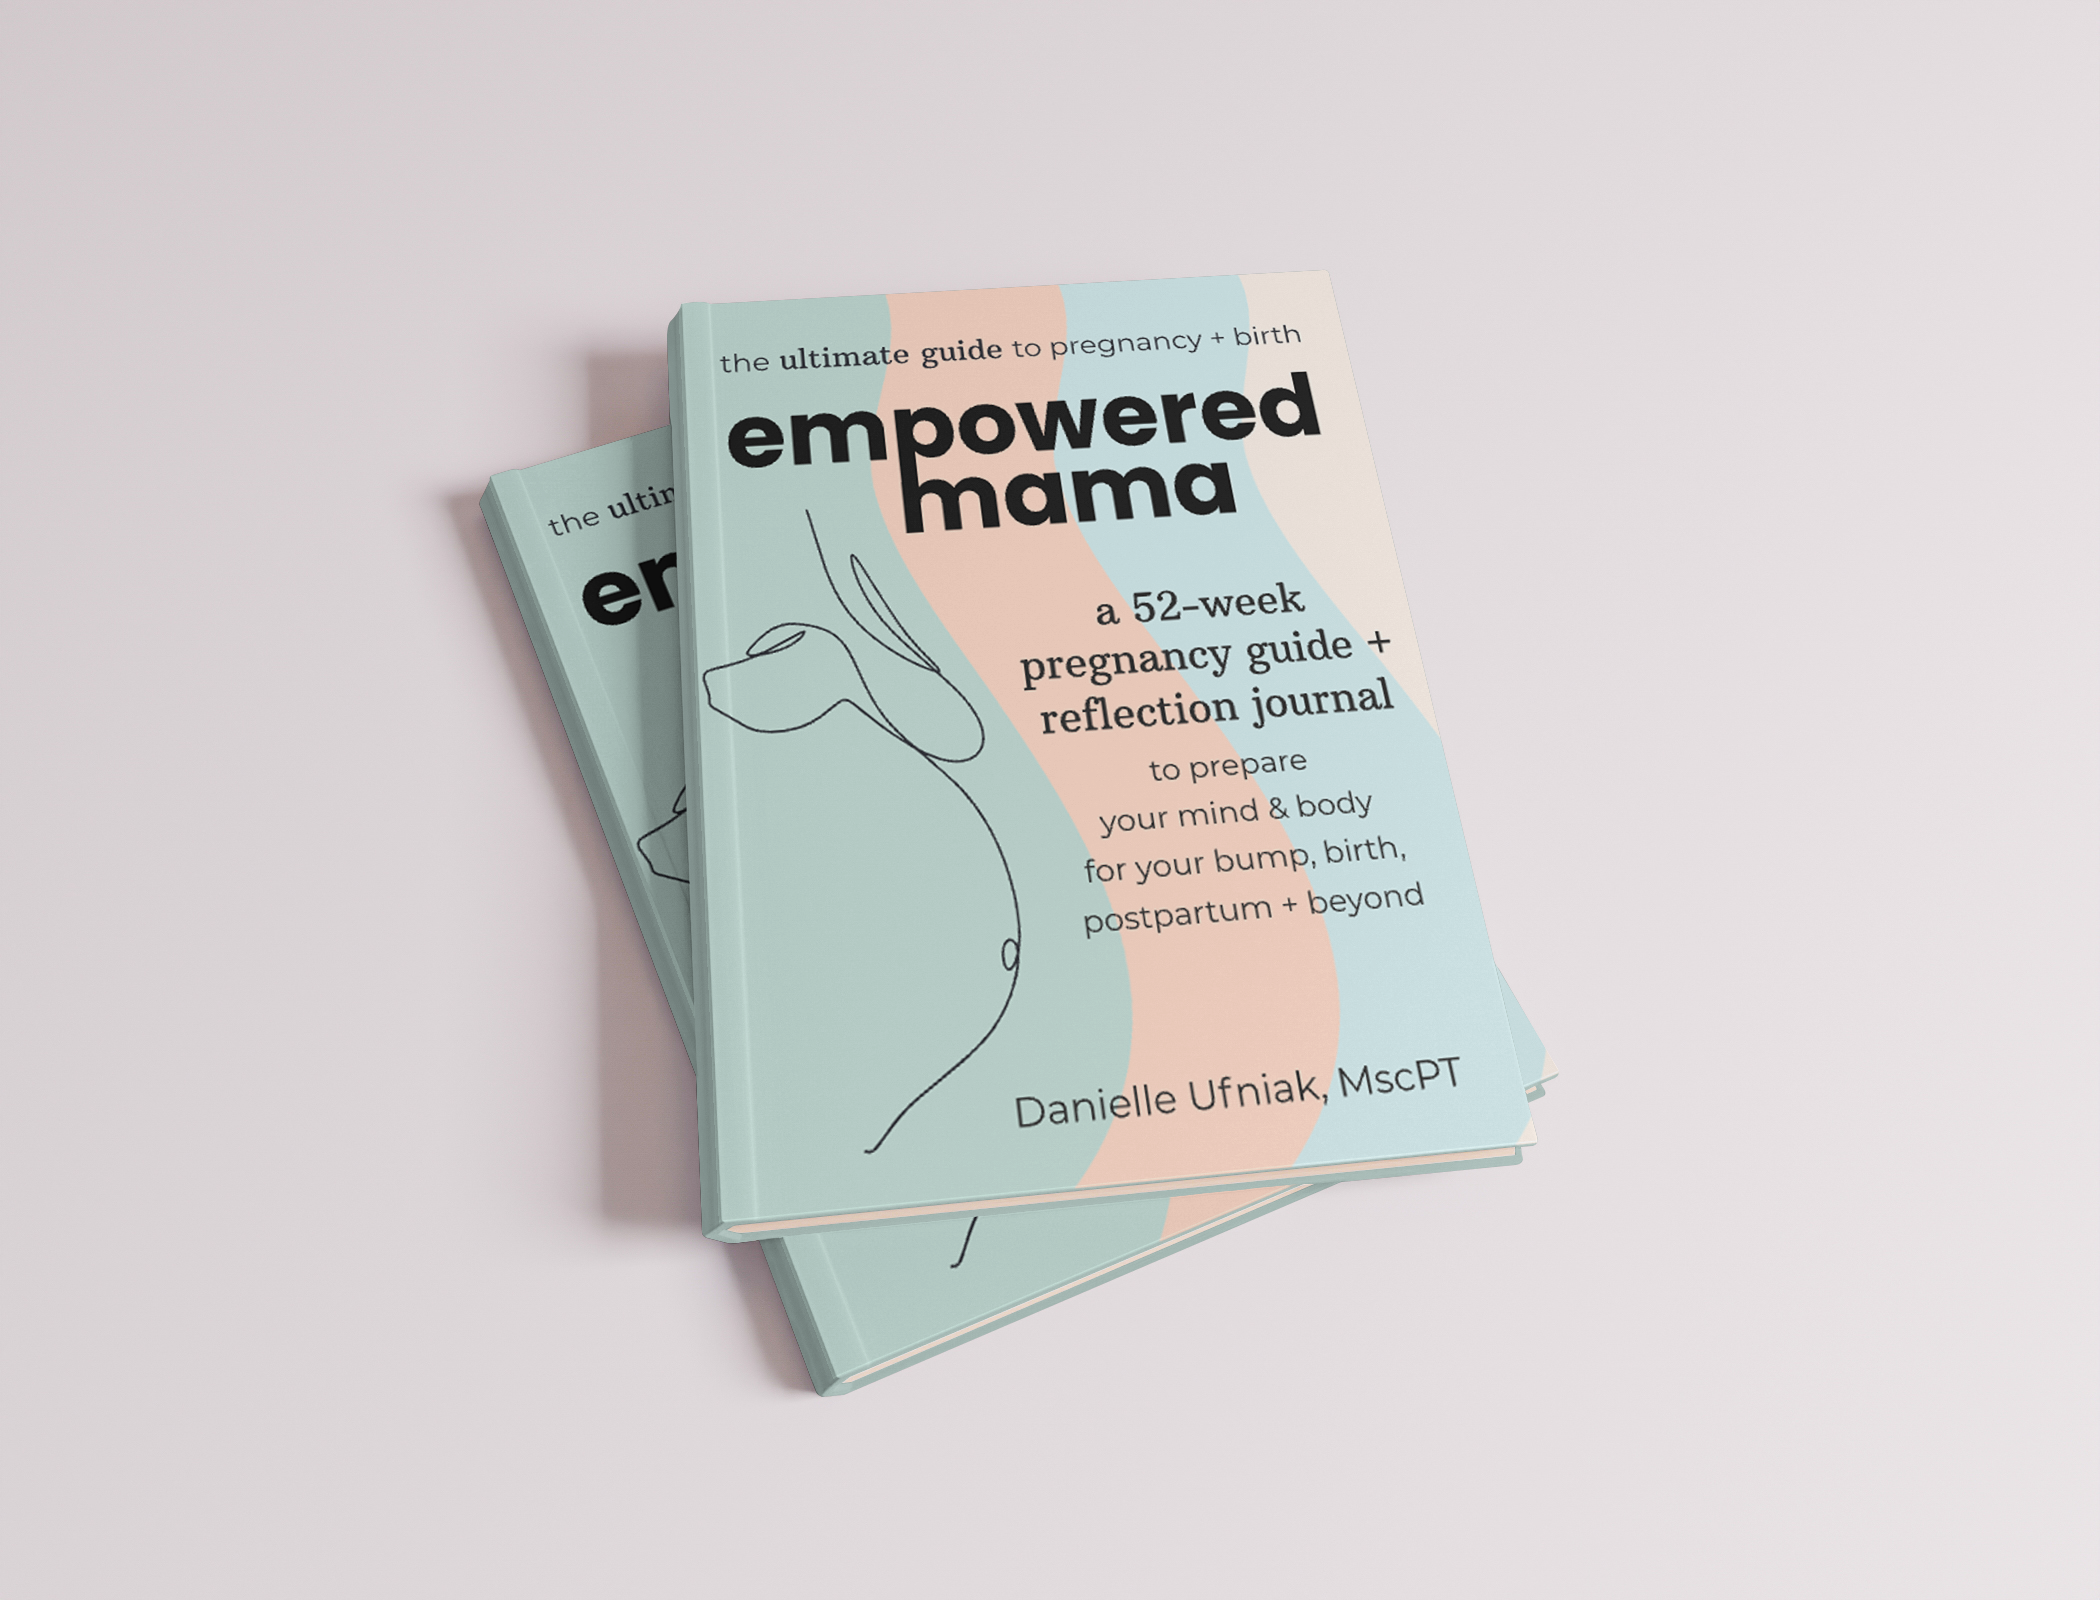 Empowered mama Book mock up photo.png (Copy) (Copy)